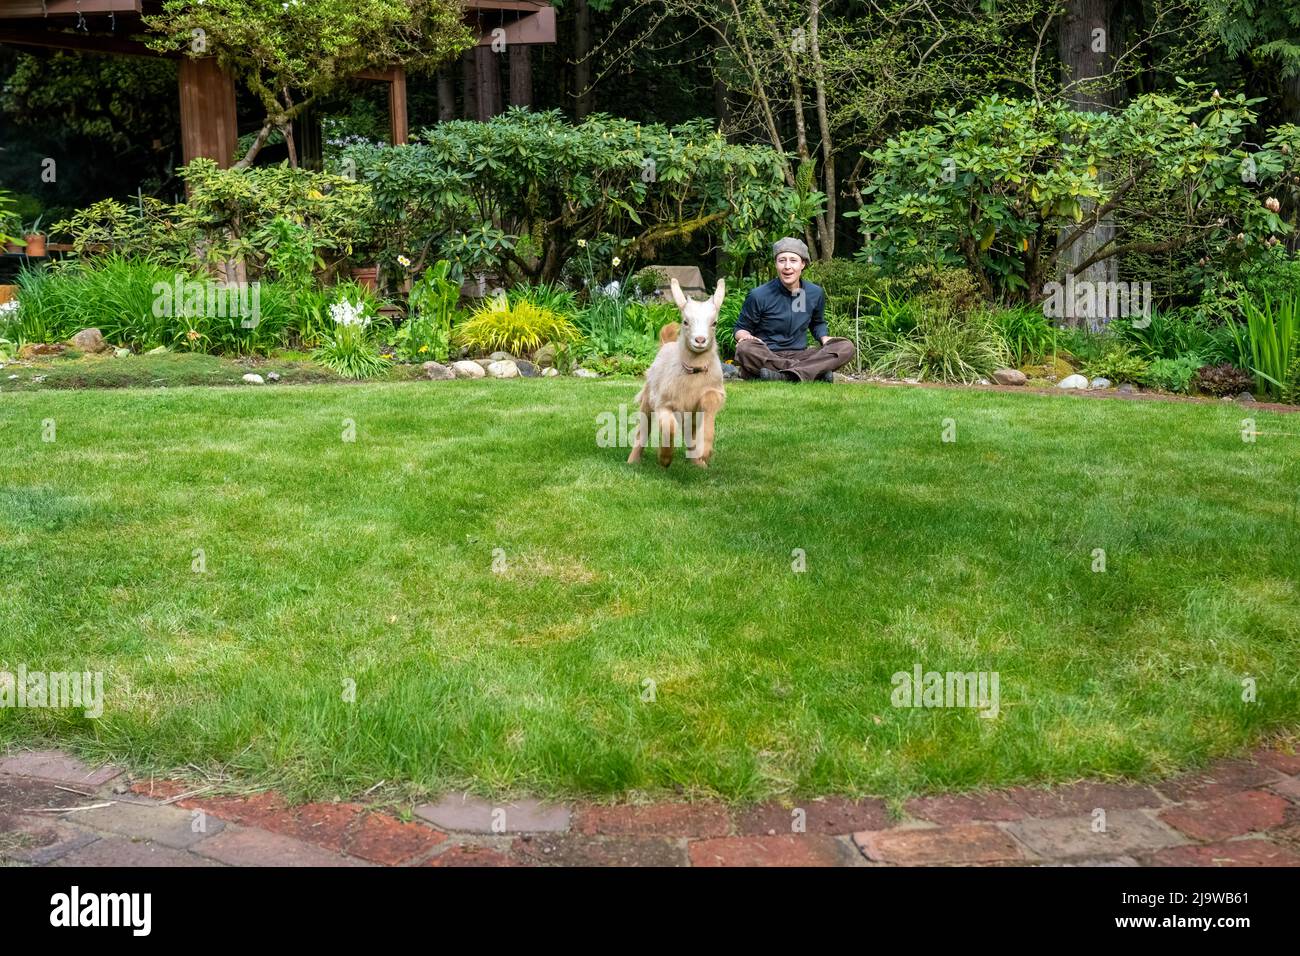 Issaquah, Washington, USA.  Three week old male Guernsey Goat kid running and jumping in a grassy yard with his owner Stock Photo